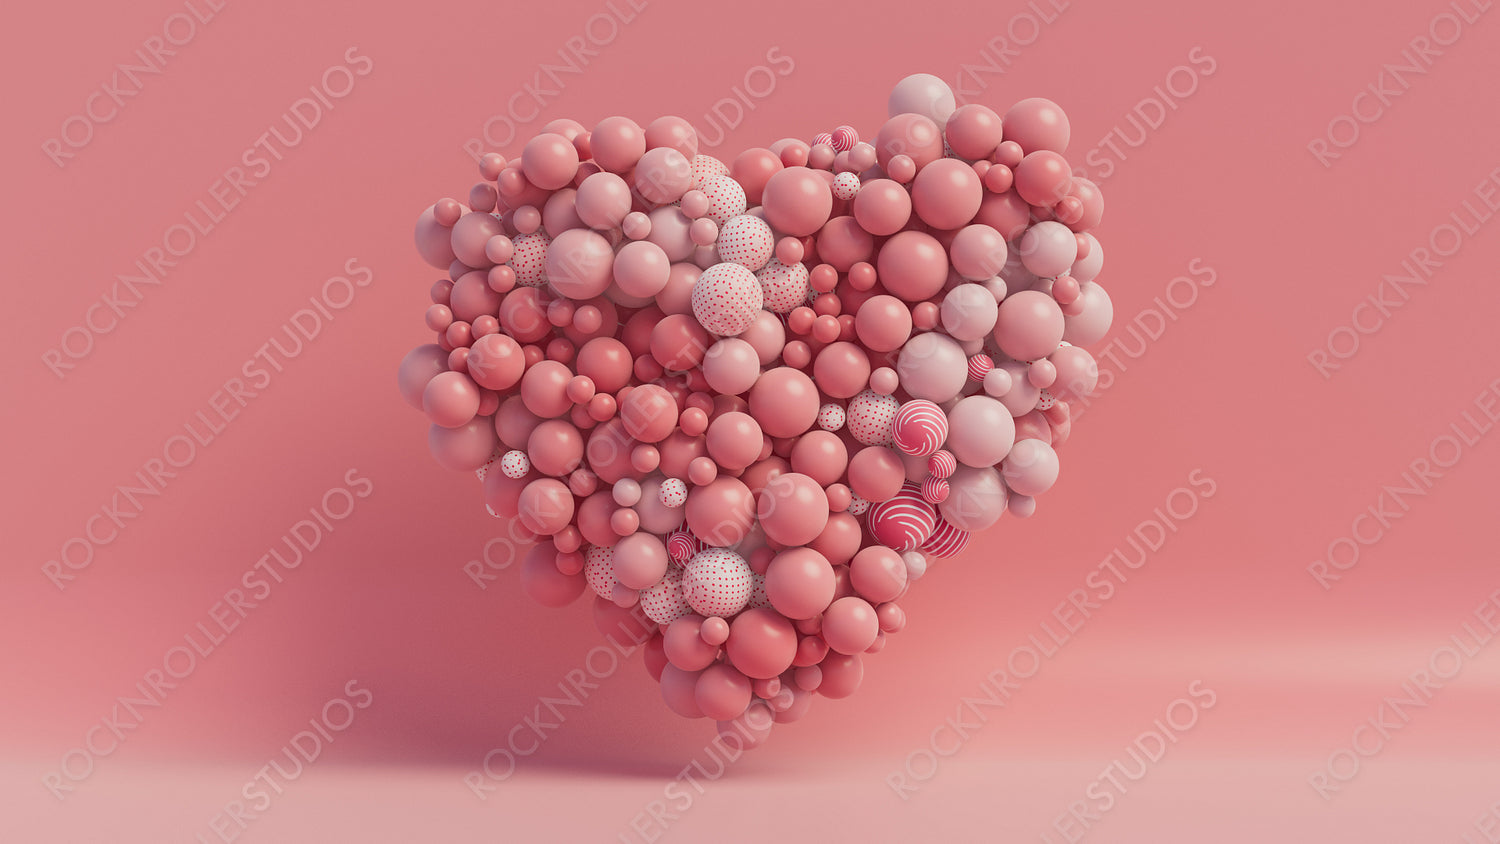 Multicolored  Balloon Love Heart. Pink, Polka Dot and Striped Balloons arranged in a heart shape. 3D Render 